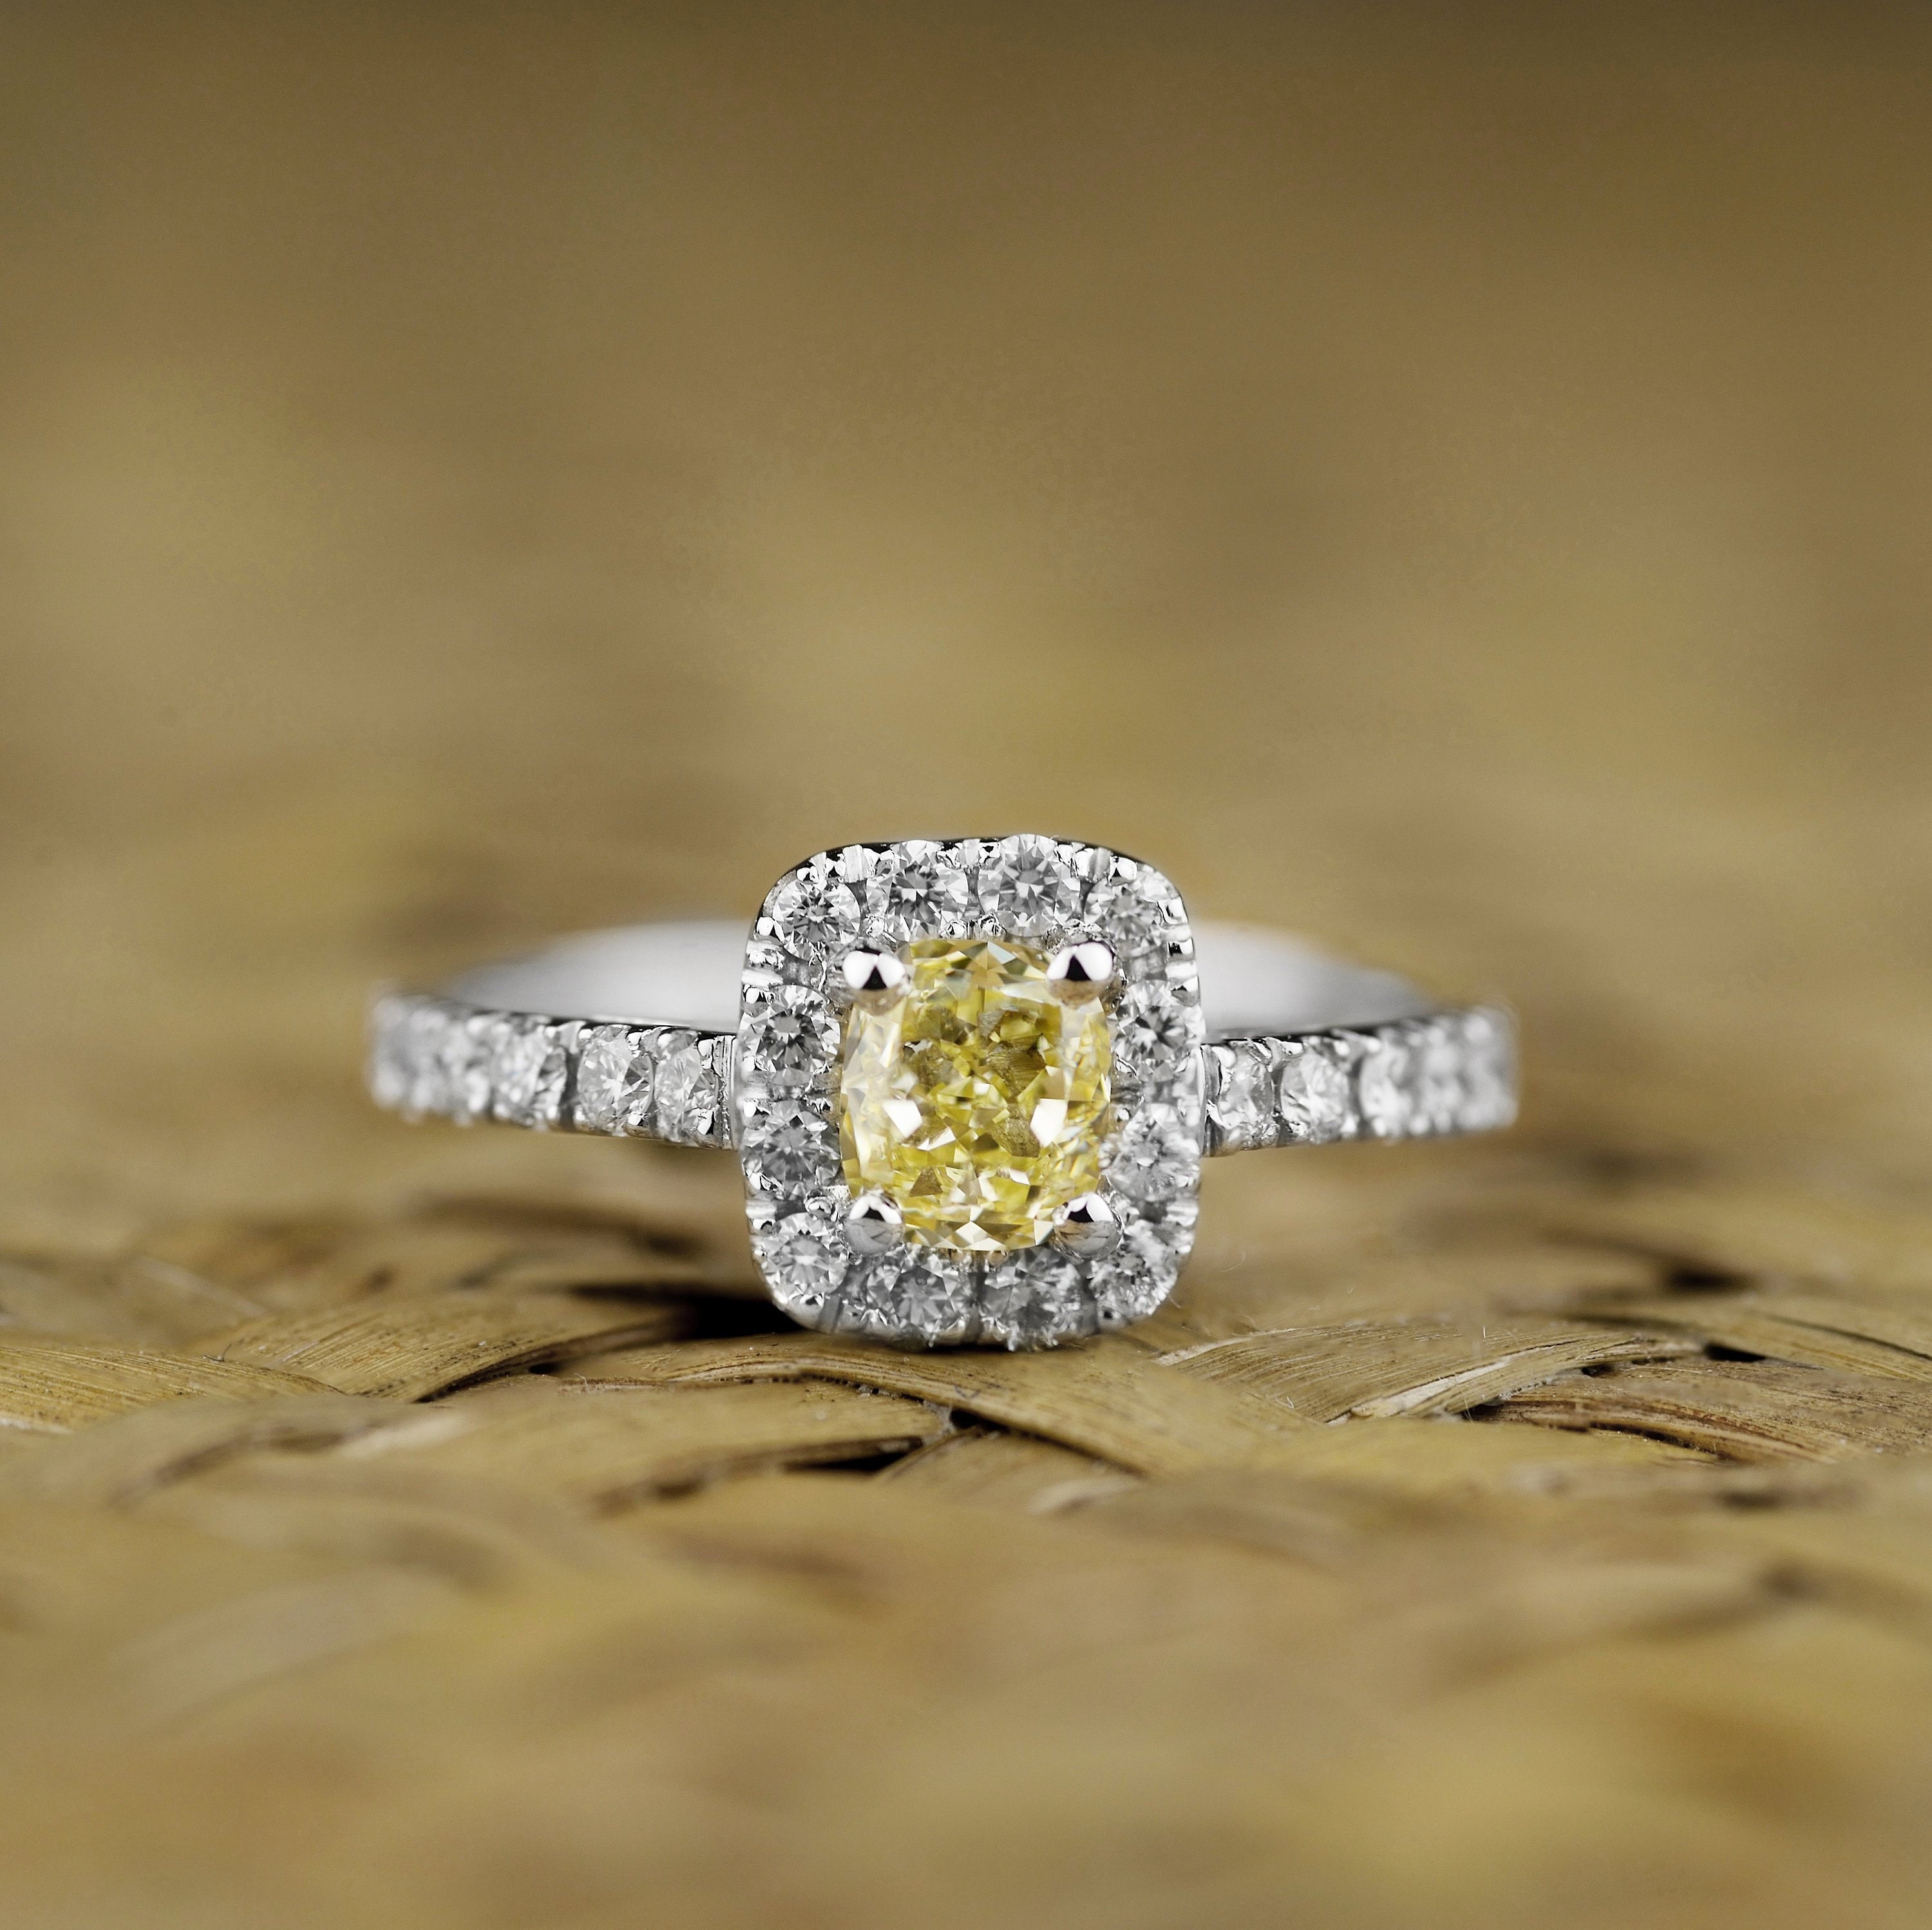 Fancy Color Diamond Engagement Ring-Yellow Ring-Cushion Cut Halo Ring Platinum-Made To Order